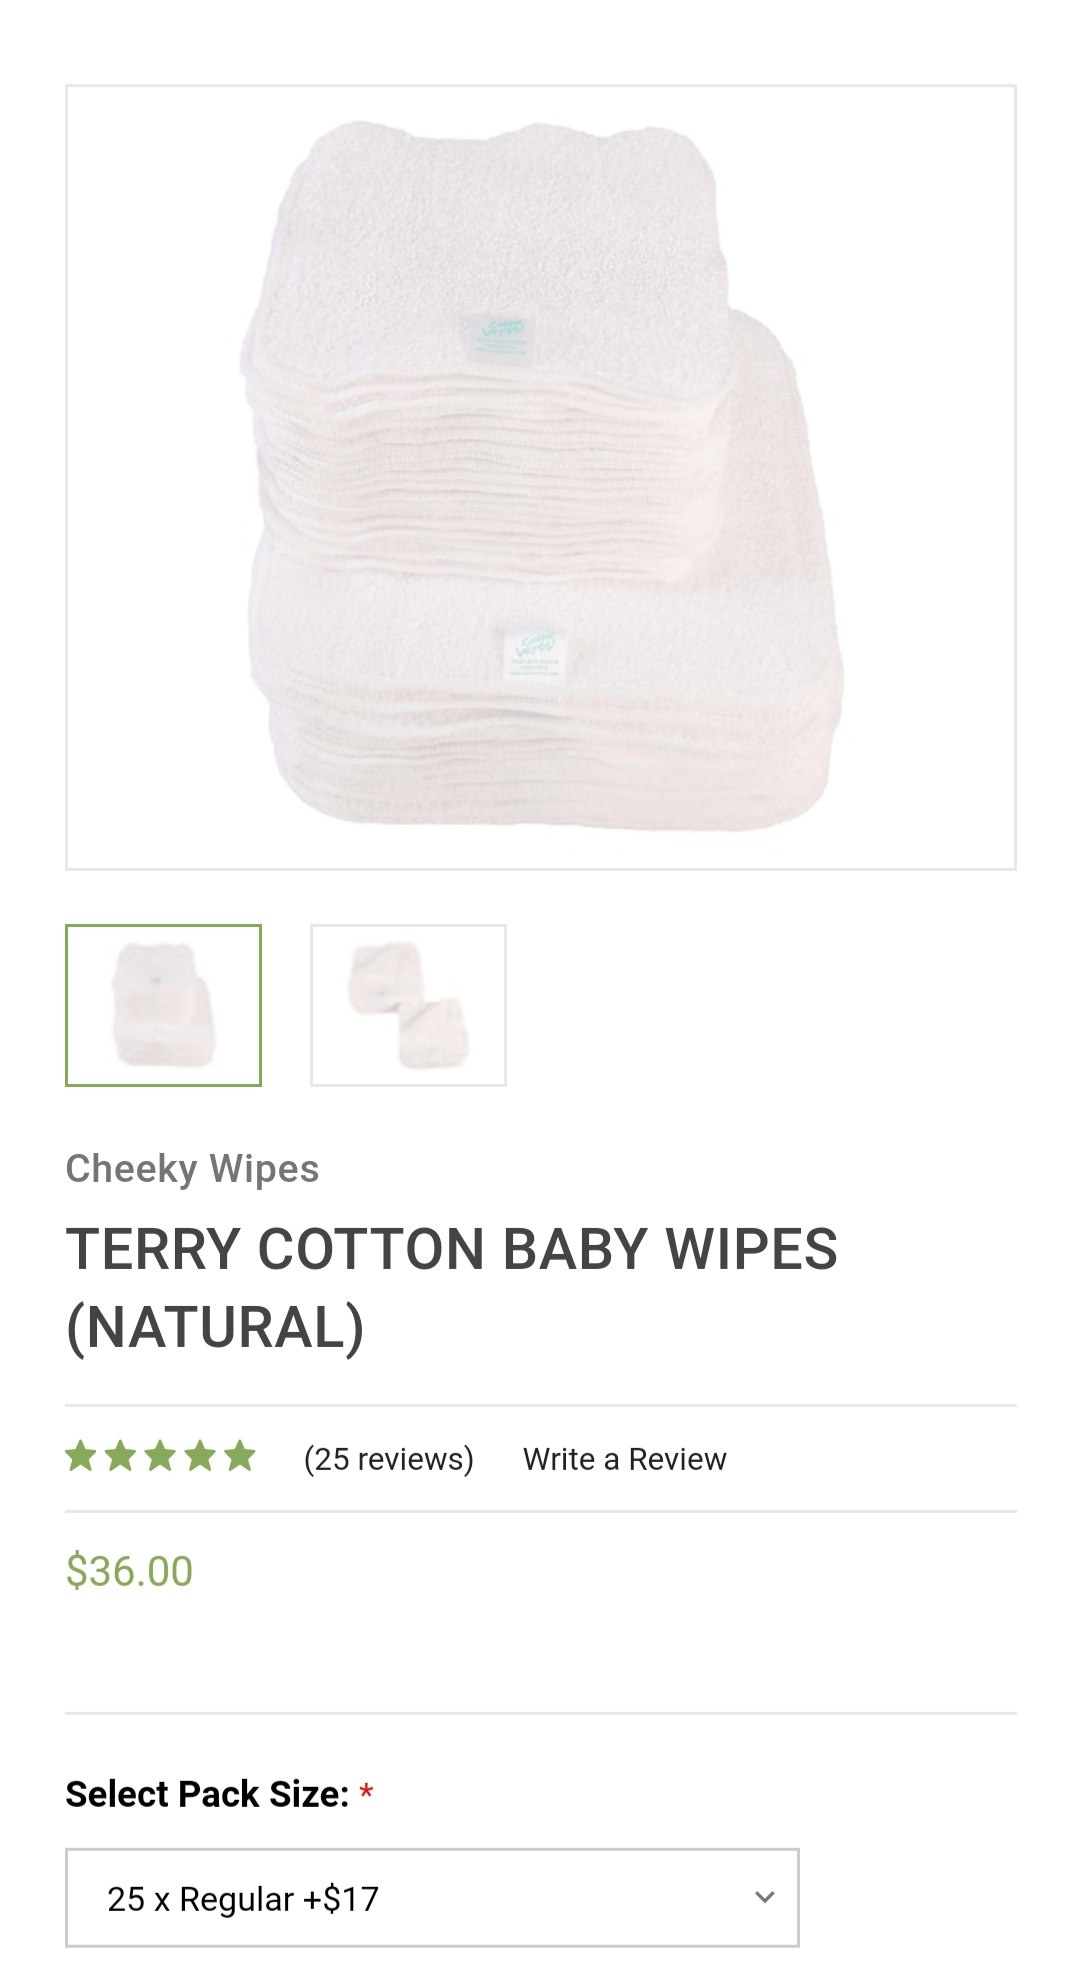 Resuable baby wipes